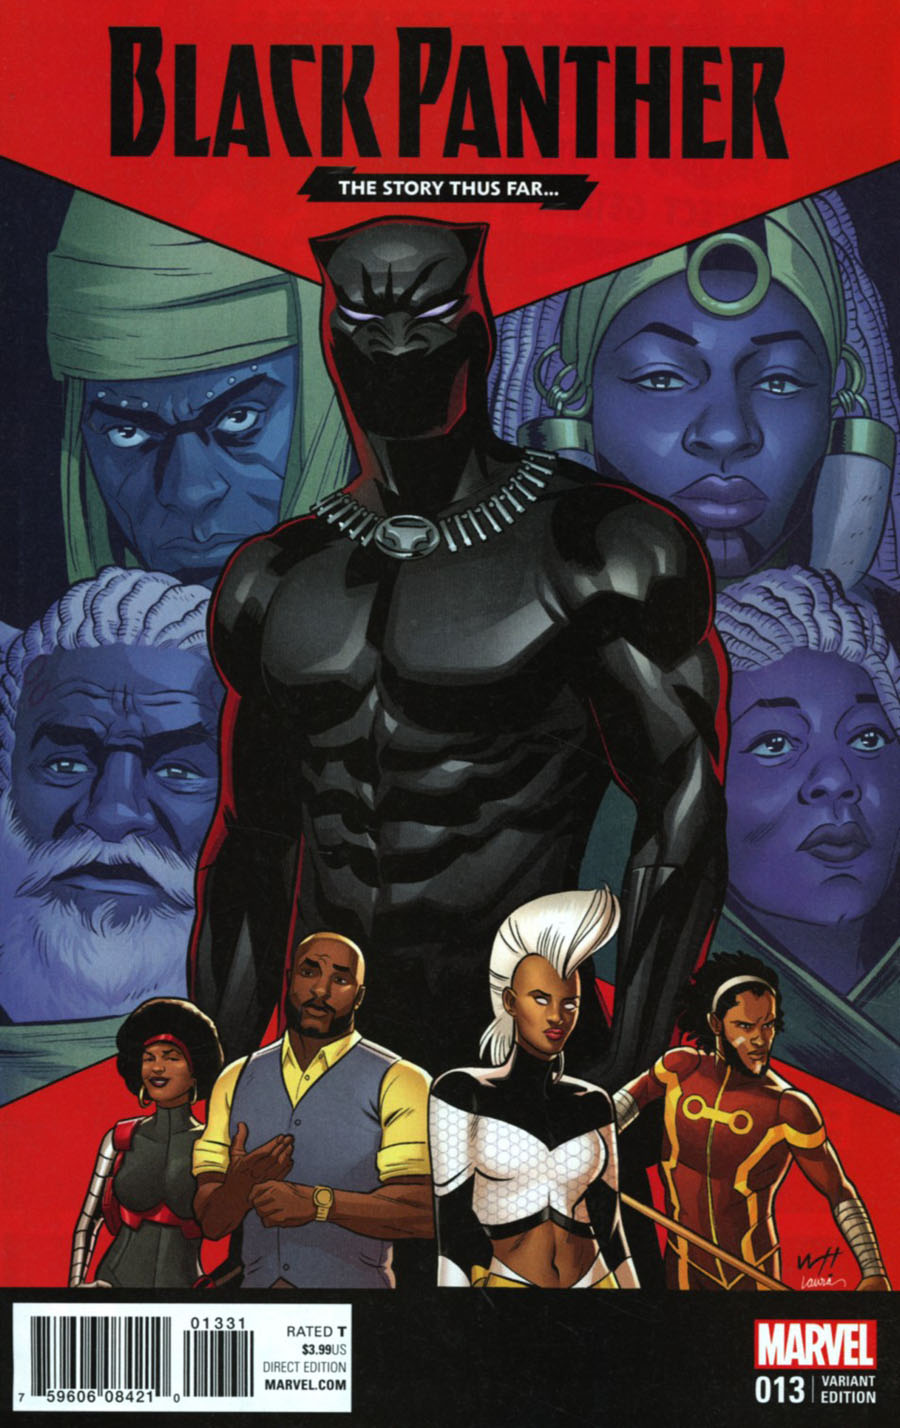 Black Panther Vol 6 #13 Cover C Variant Wilfredo Torres Story Thus Far Cover